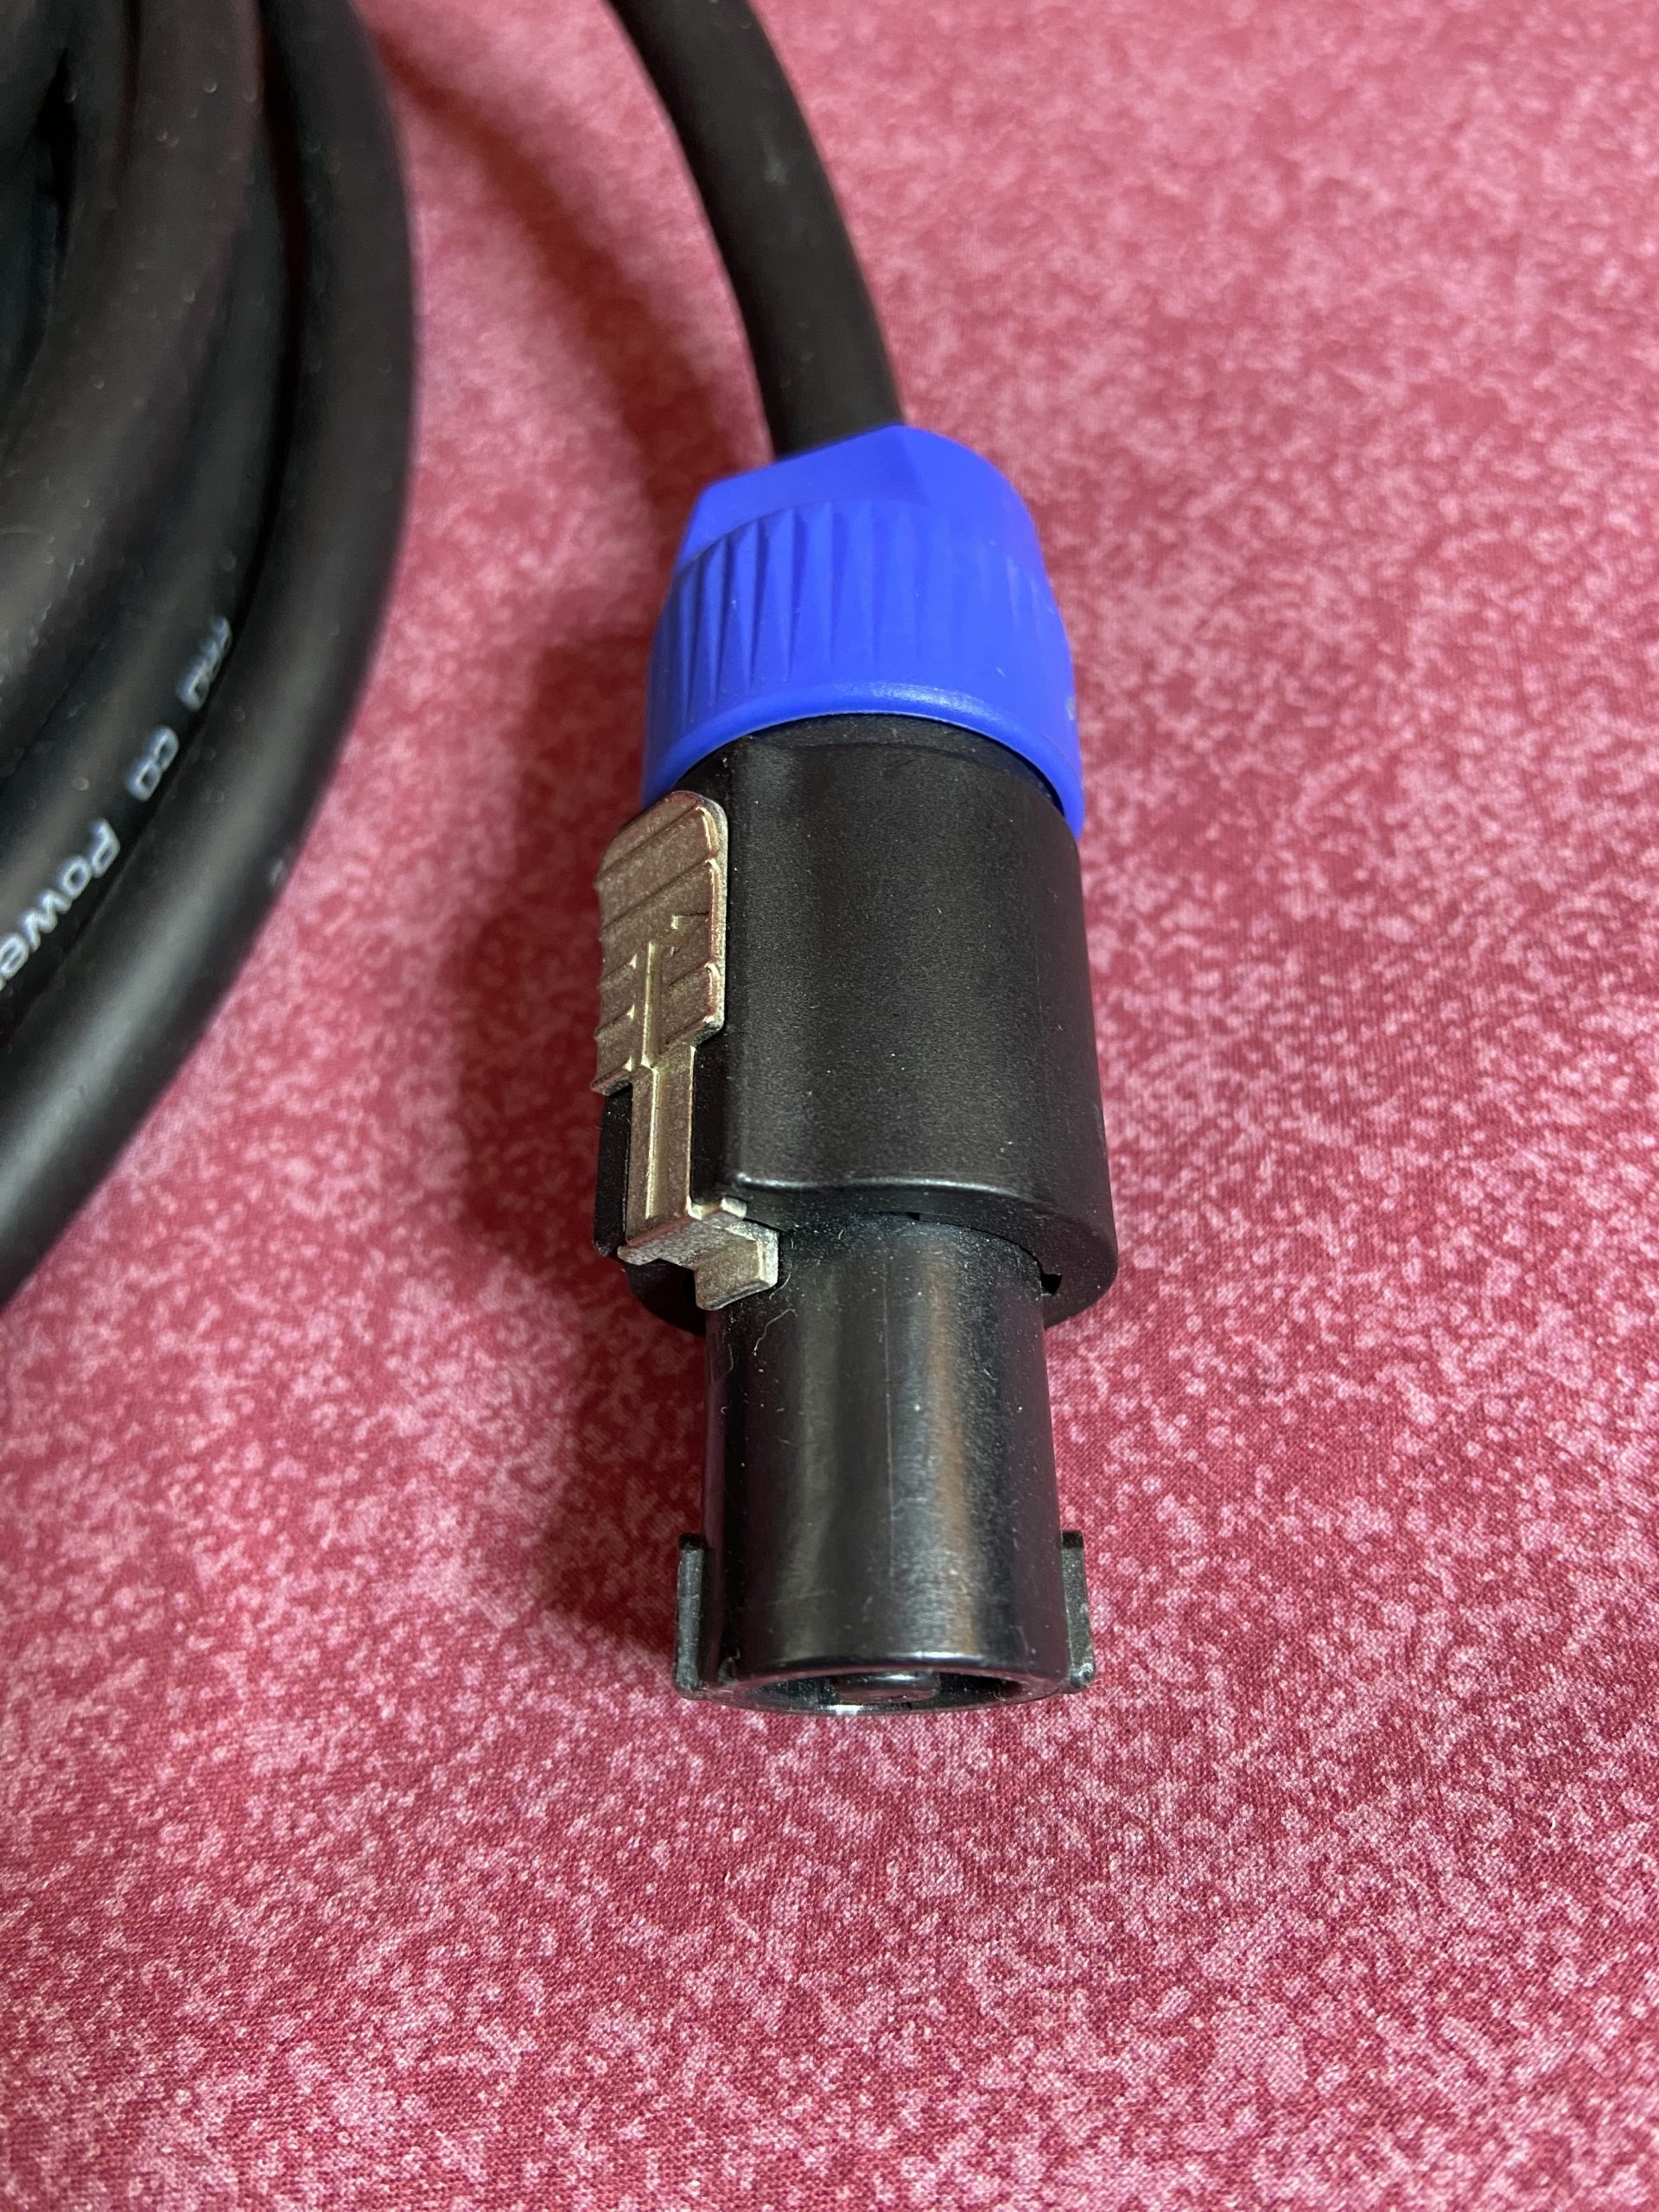 Closeup of cable end connector.